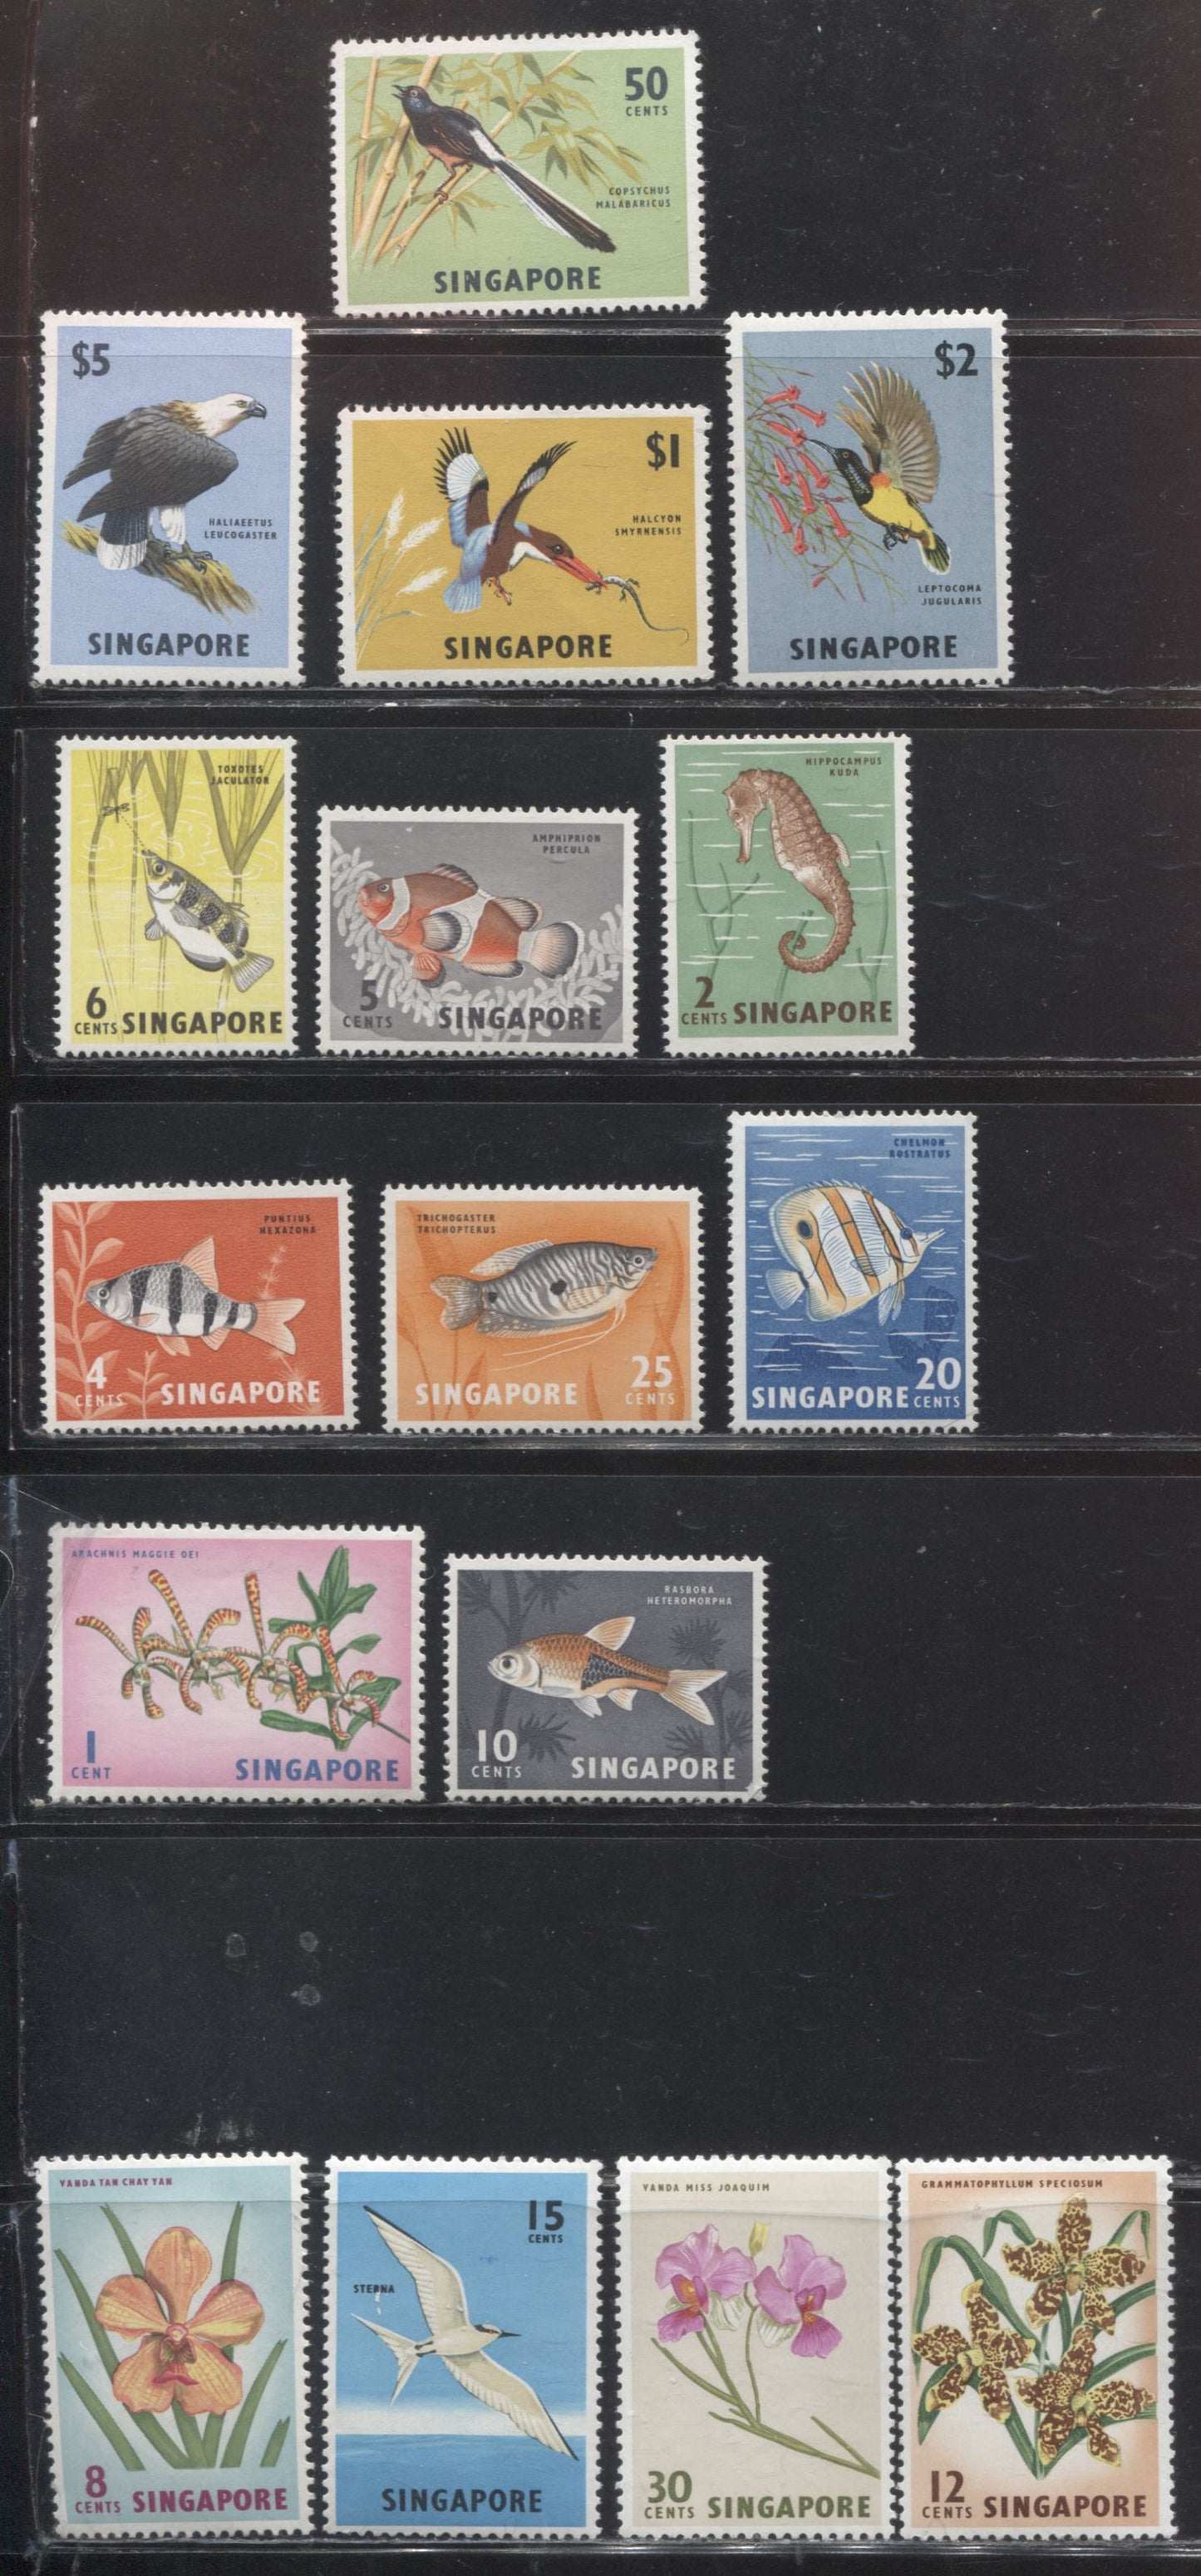 Lot 303 Singapore SG#63-77 1c - $5, 1962-1966 Harrison Flora and Fauna Definitive Issue, a VFNH Set on Several Different Papers